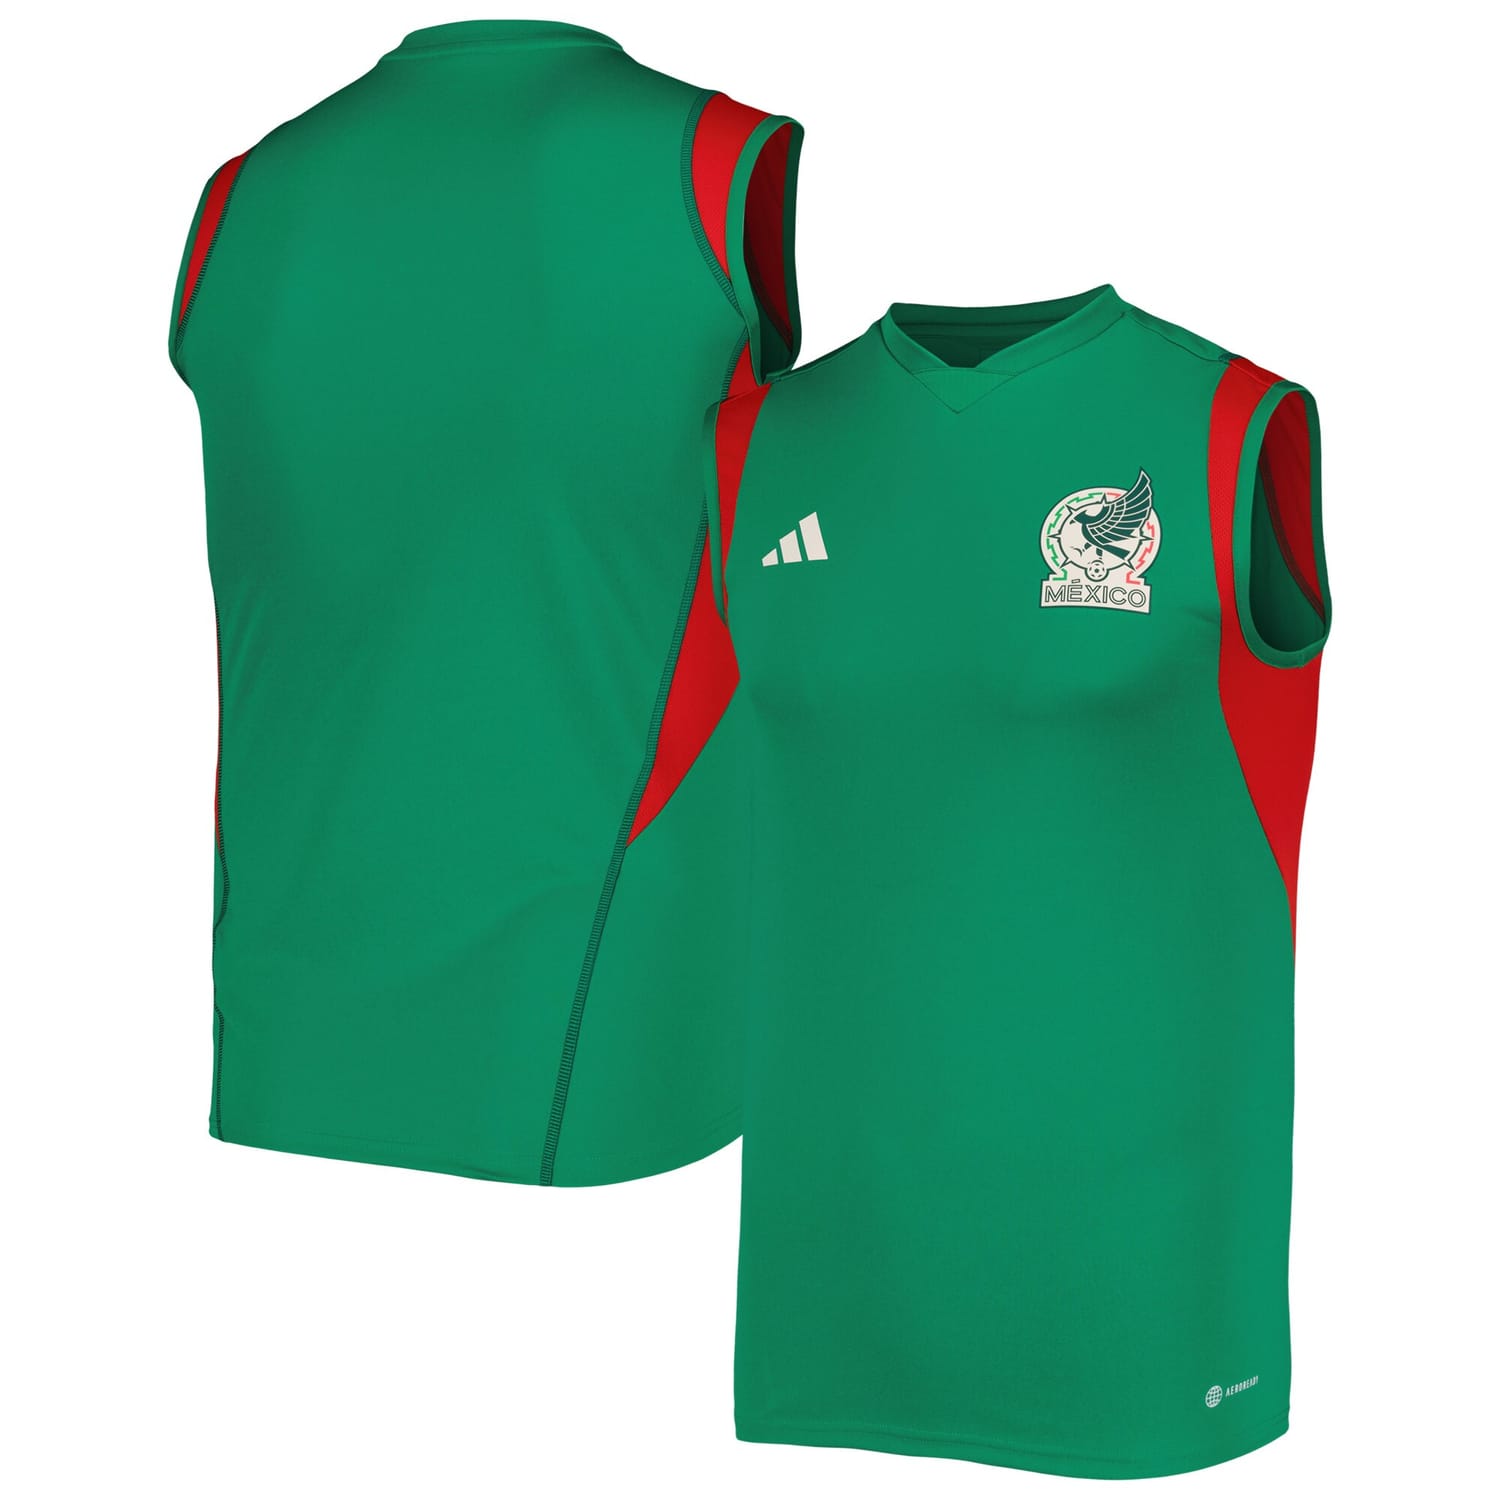 Mexico National Team Training Jersey Shirt Tank Top Green for Men